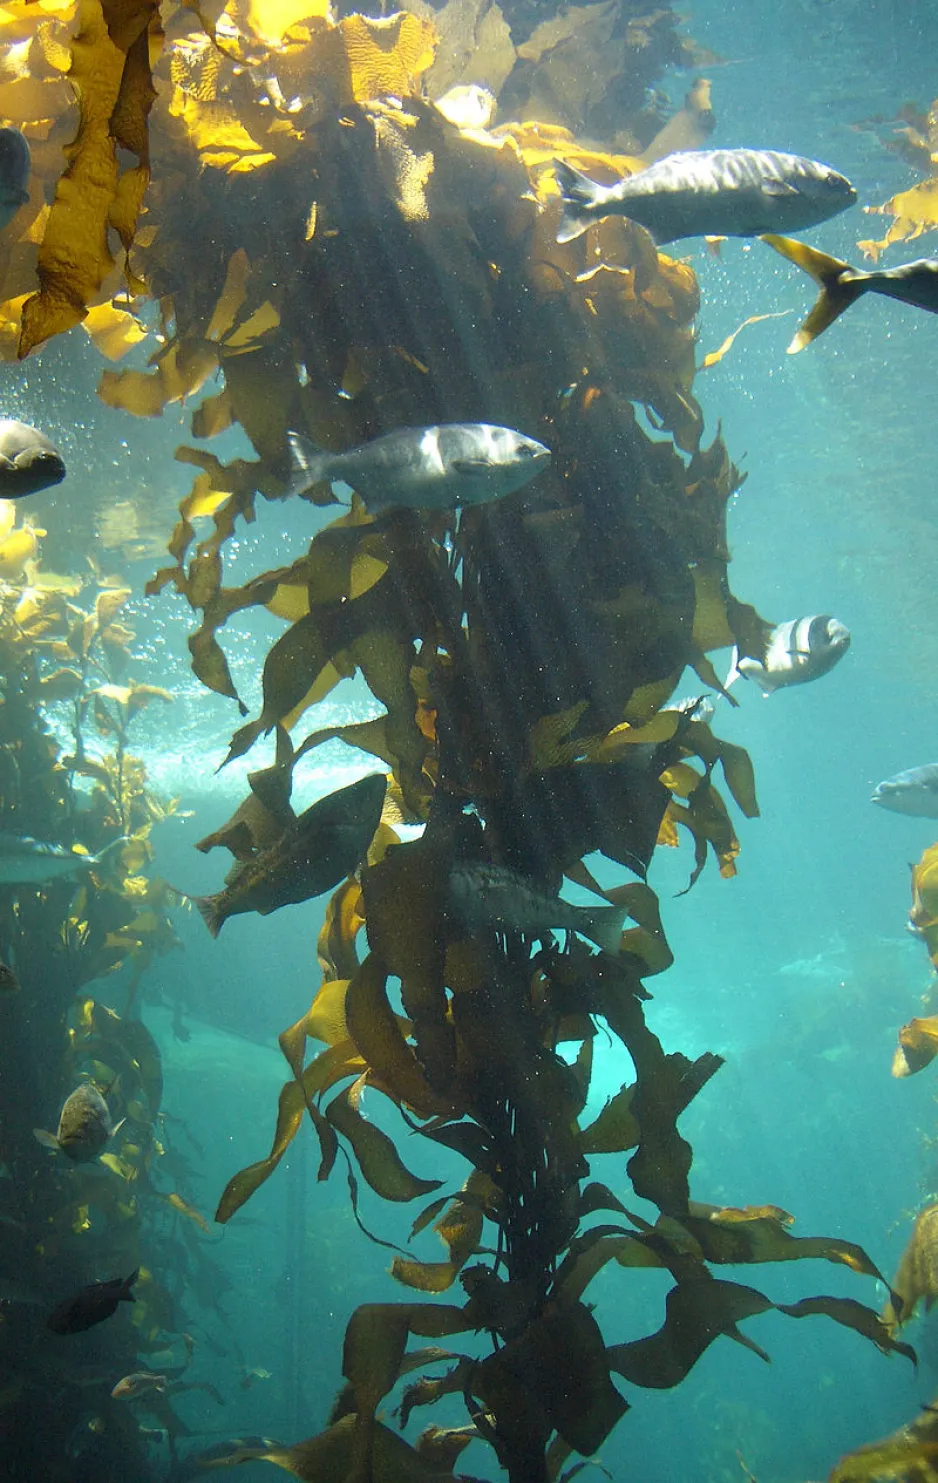 An underwater scene shows a column of seaweed surrounded by large silvery fish, with turquoise water all around.